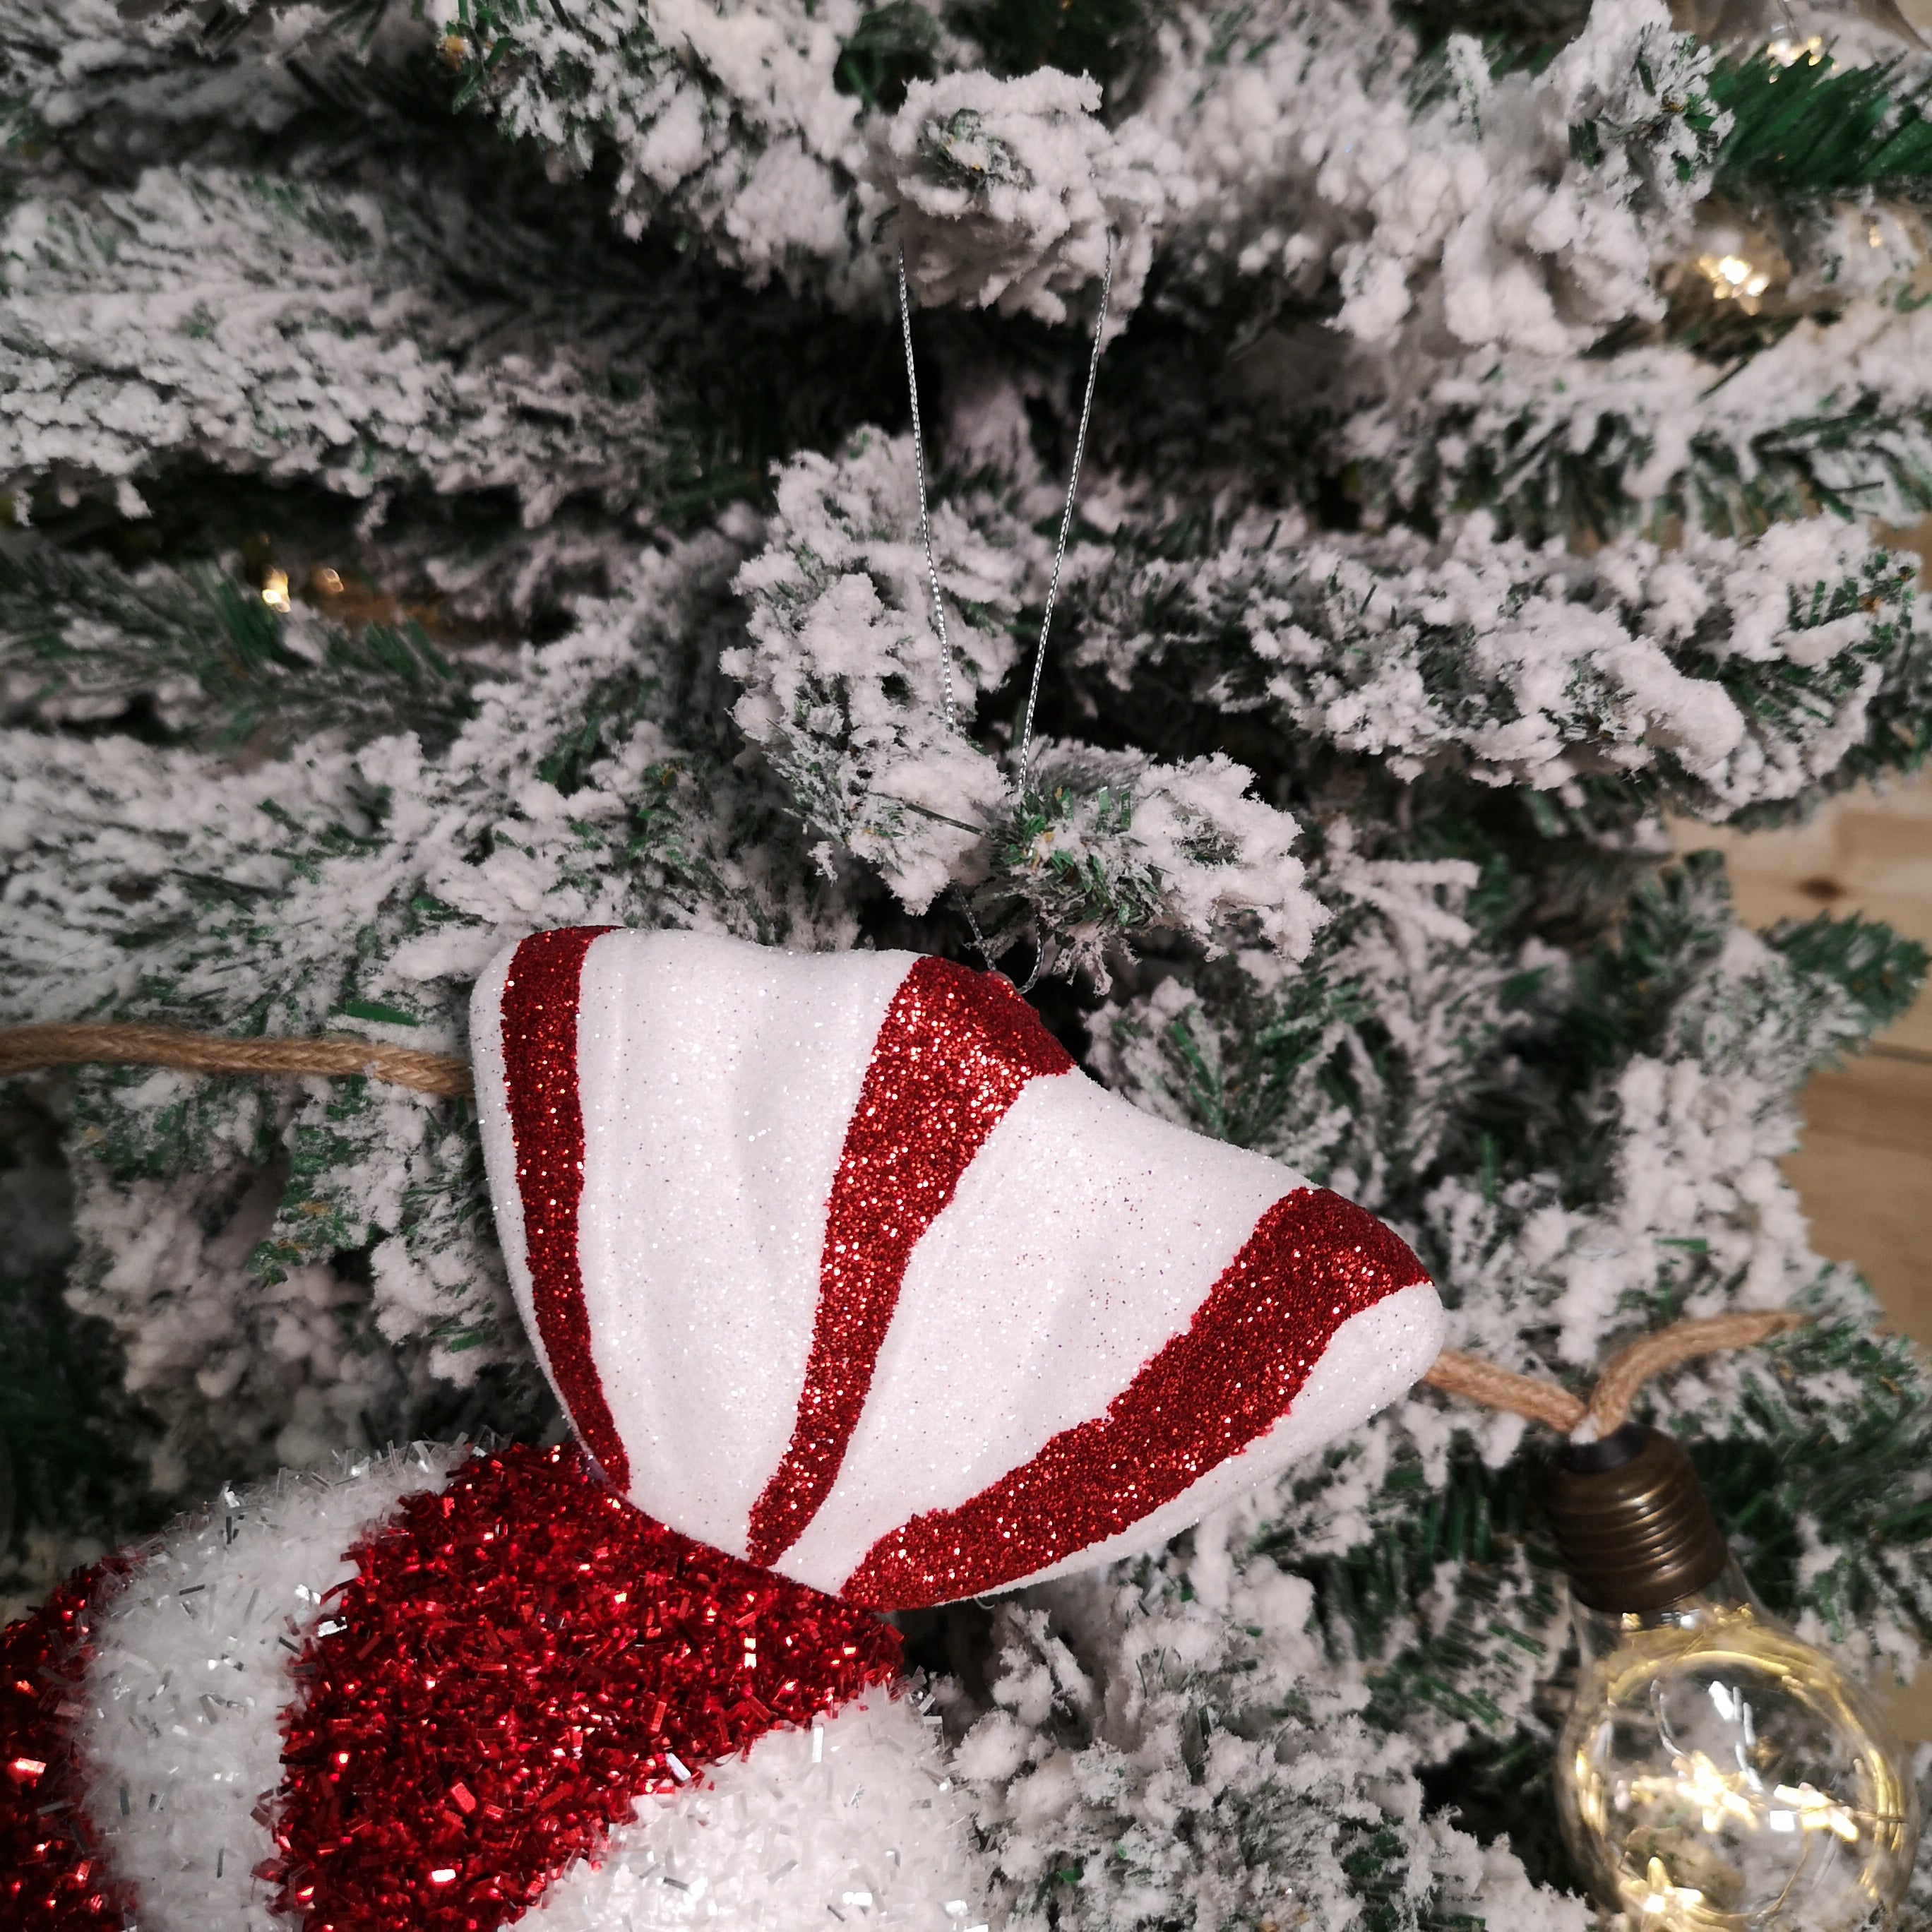 28cm Red and White Glitter Candy Stripe Sweet Hanging Christmas Decoration